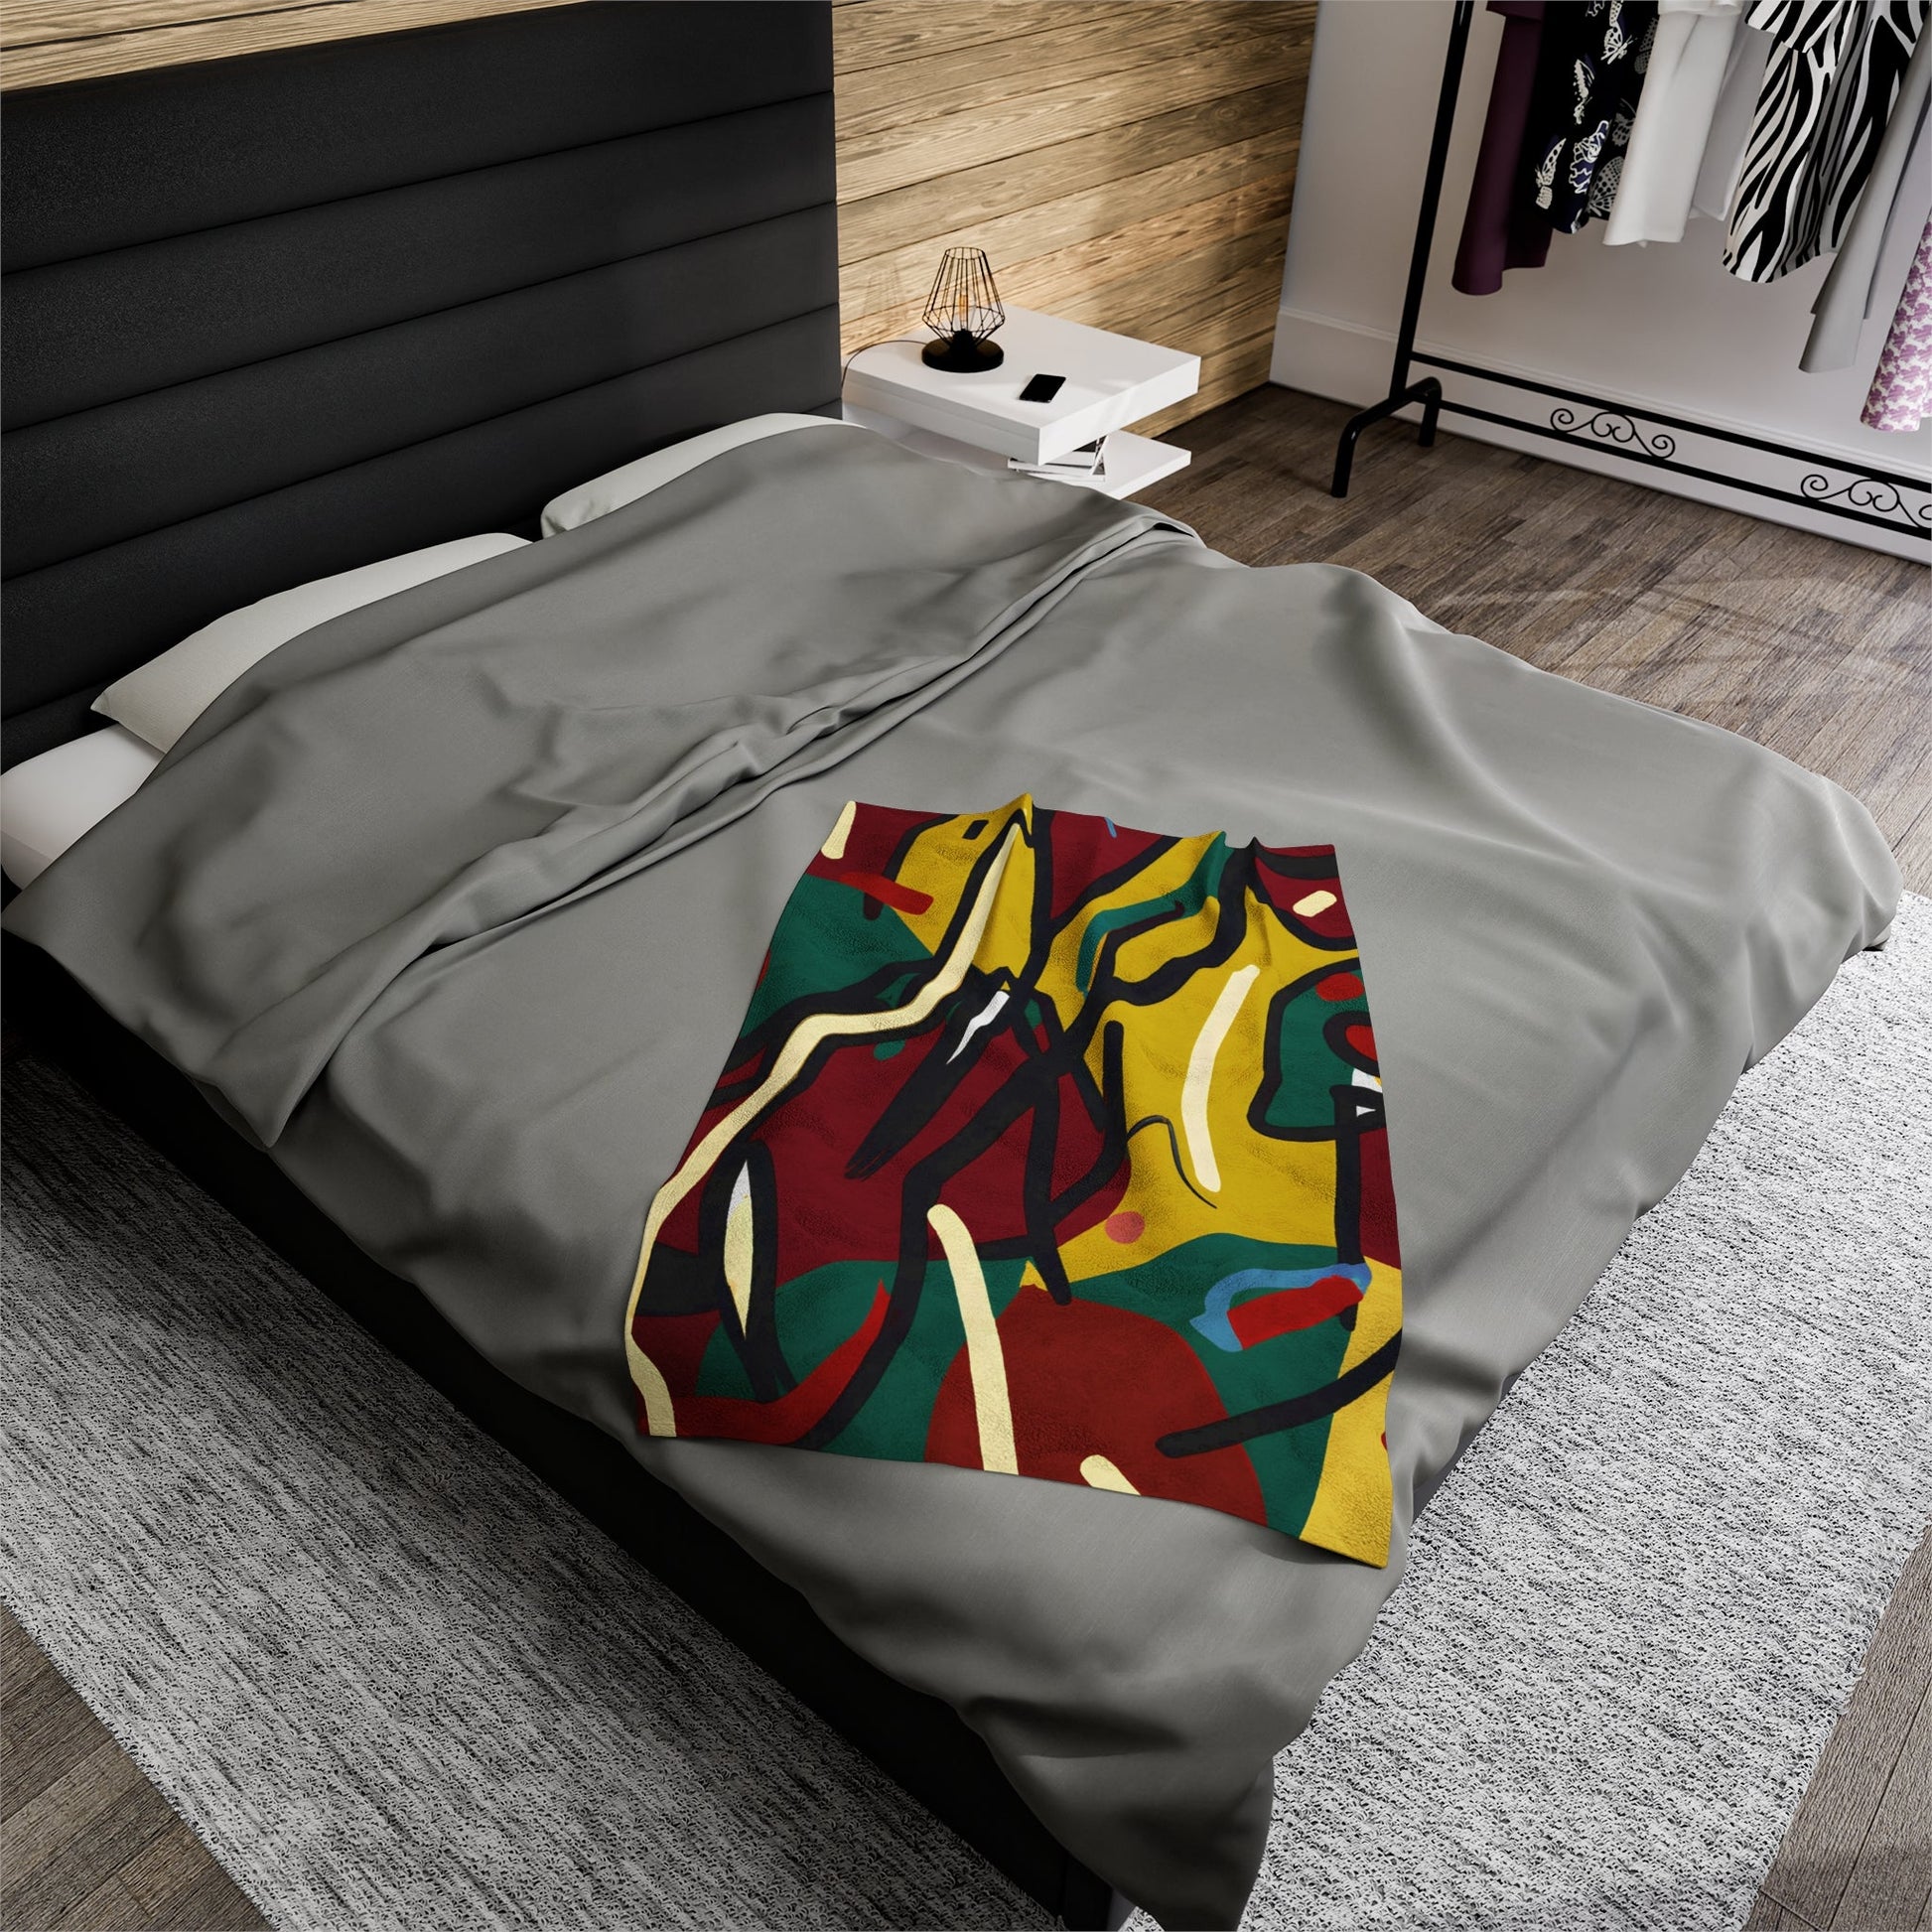 Absoluxe - Plush Blanket-All Over Prints-Mr.Zao - Krazy Art Gallery